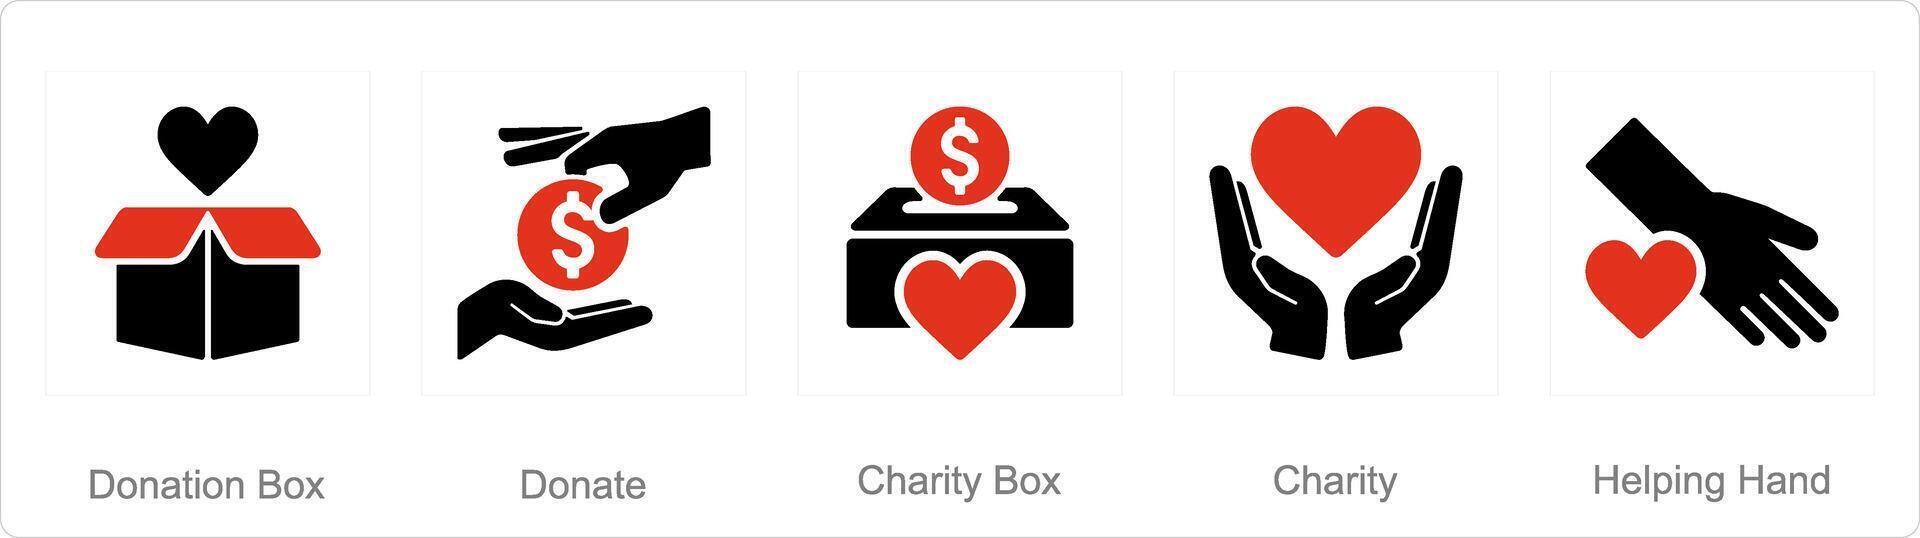 A set of 5 Charity and donation icons as donation box, donate, charity box vector